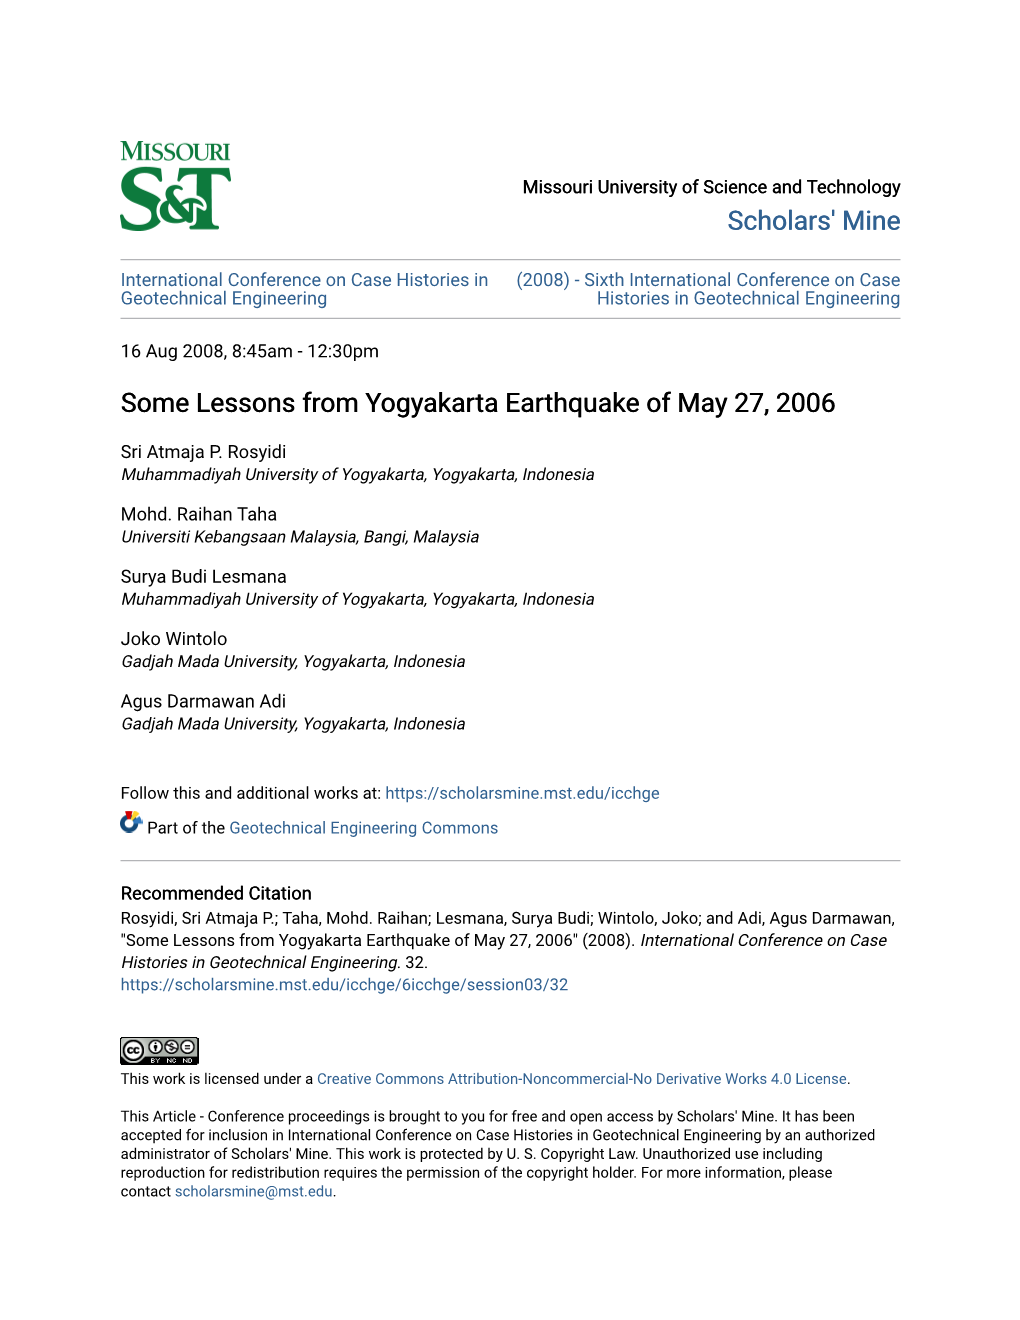 Some Lessons from Yogyakarta Earthquake of May 27, 2006